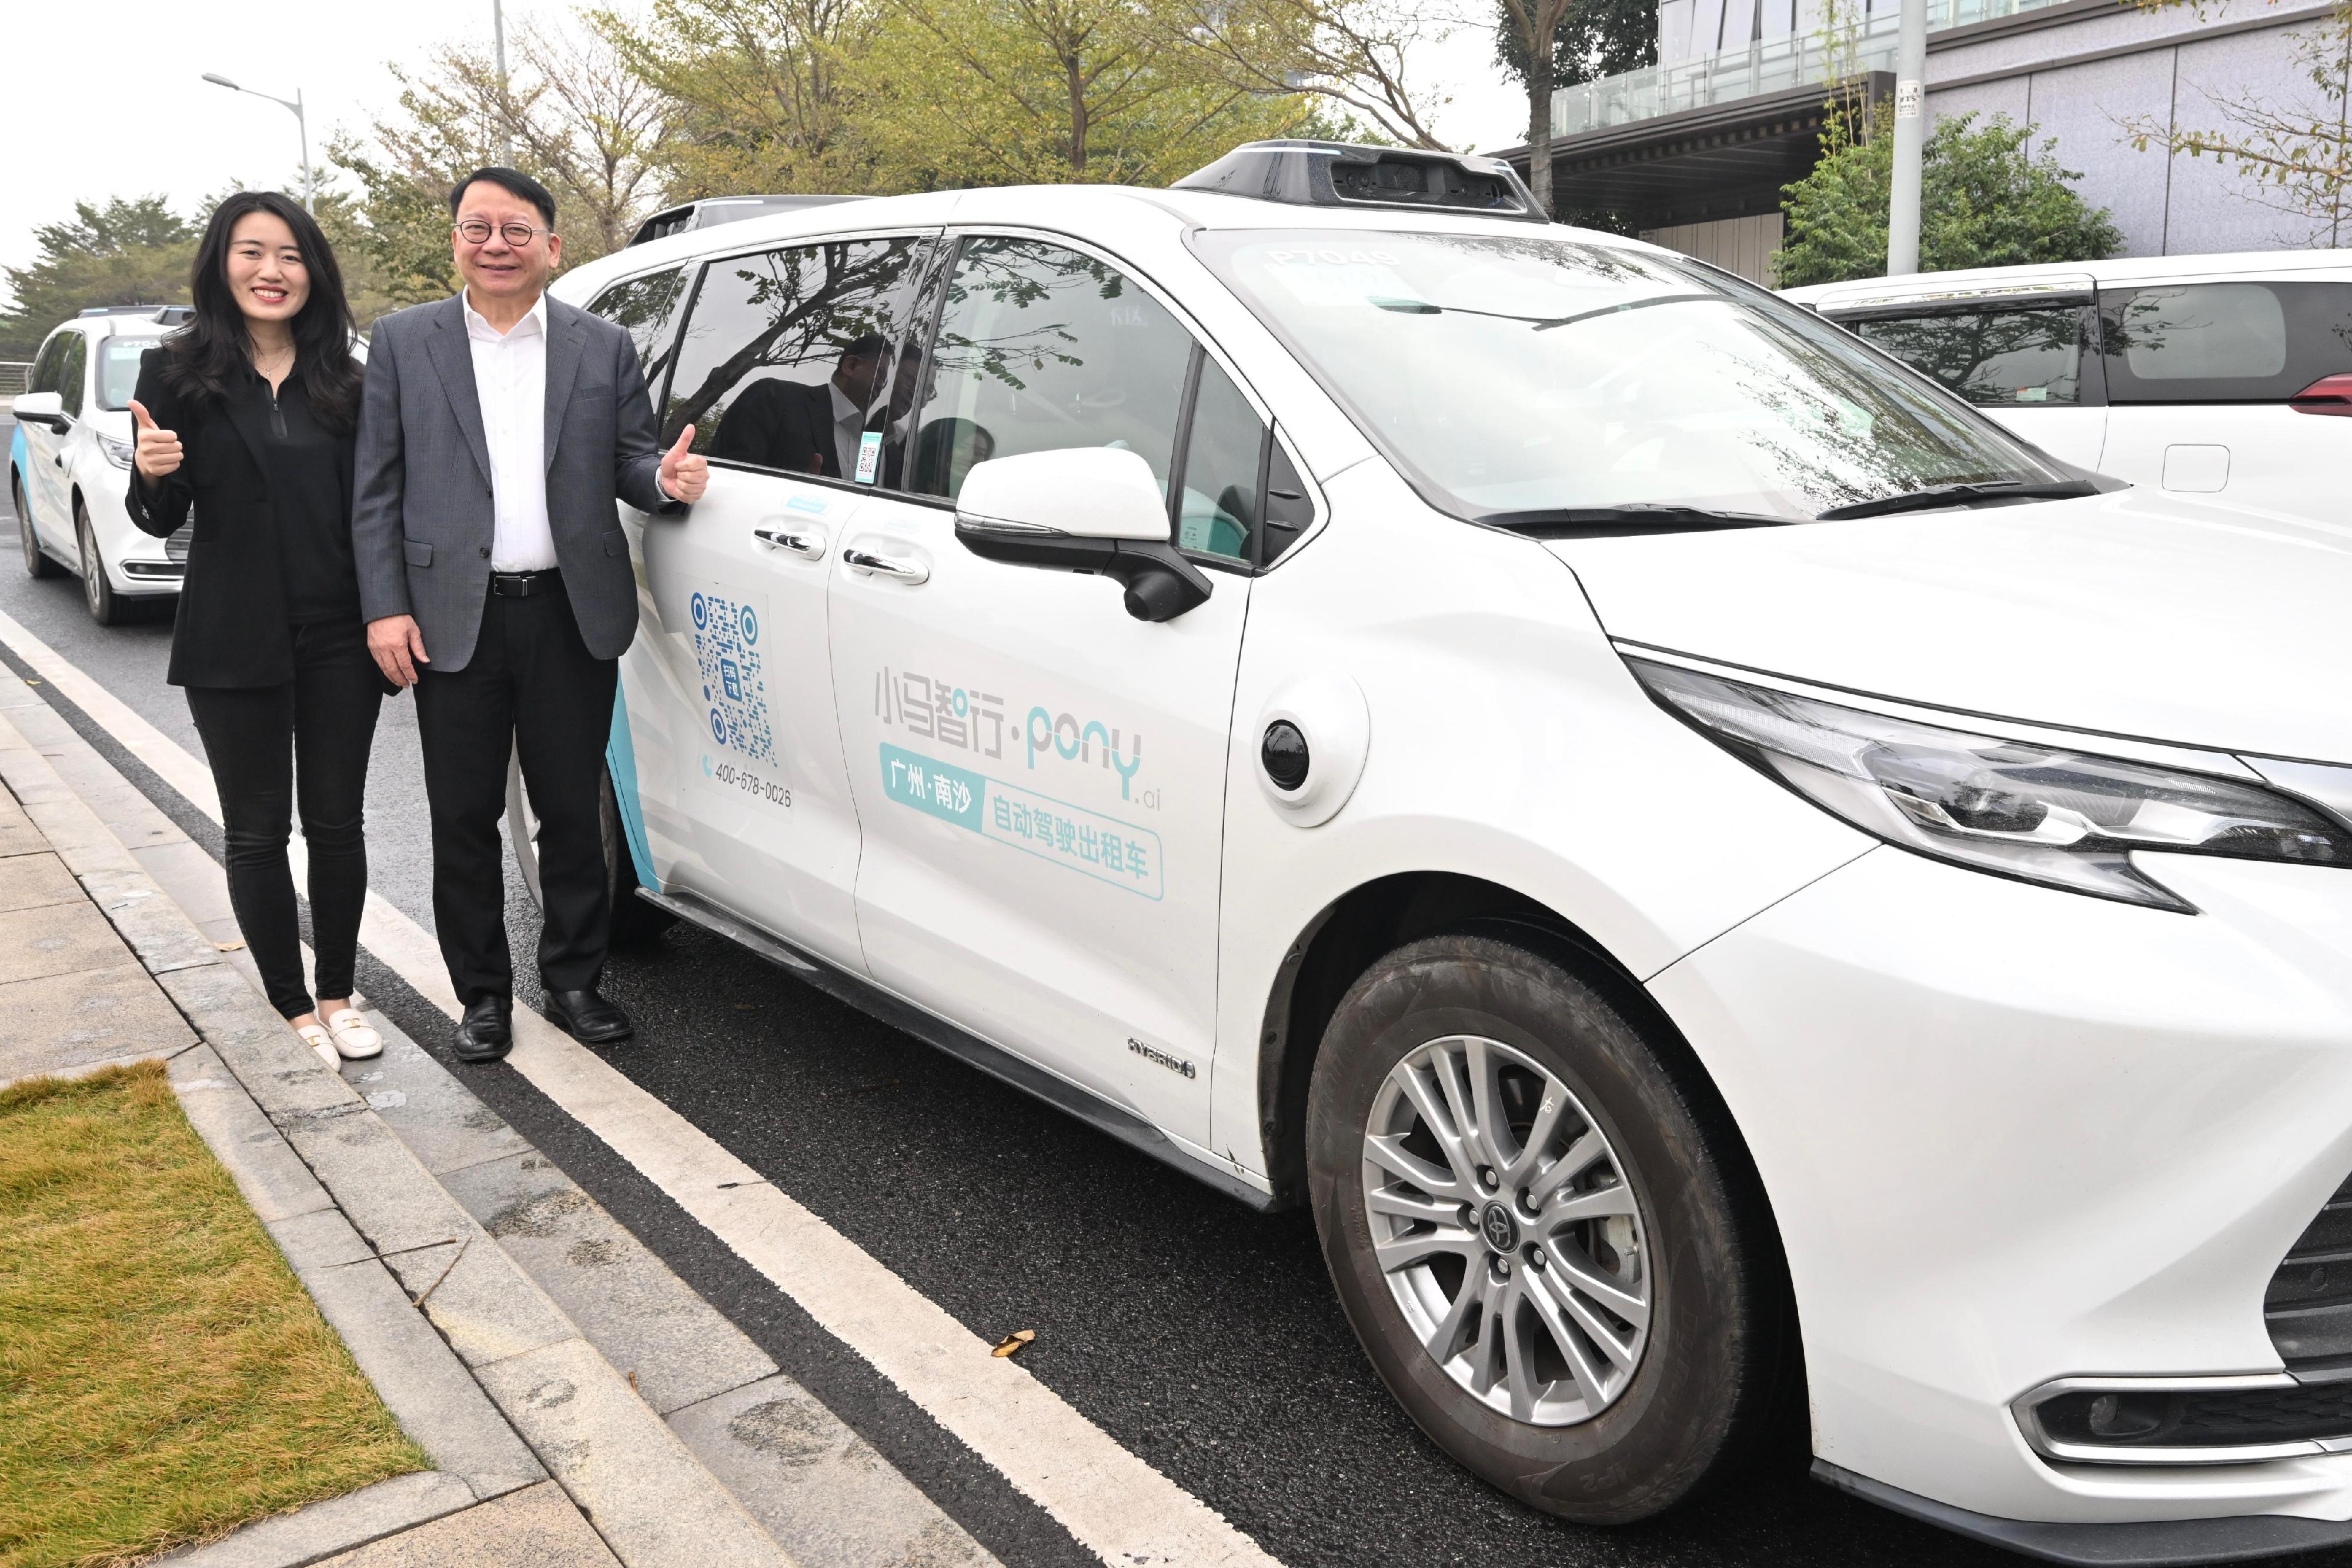 The Chief Secretary for Administration, Mr Chan Kwok-ki, continued his visit to Mainland cities of the Guangdong-Hong Kong-Macao Greater Bay Area in Guangzhou and Huizhou today (January 9). Photo shows Mr Chan (right) with Vice President of Pony.ai Ms Mo Luyi (left) after taking a Robotaxi of the company in Nansha, Guangzhou.